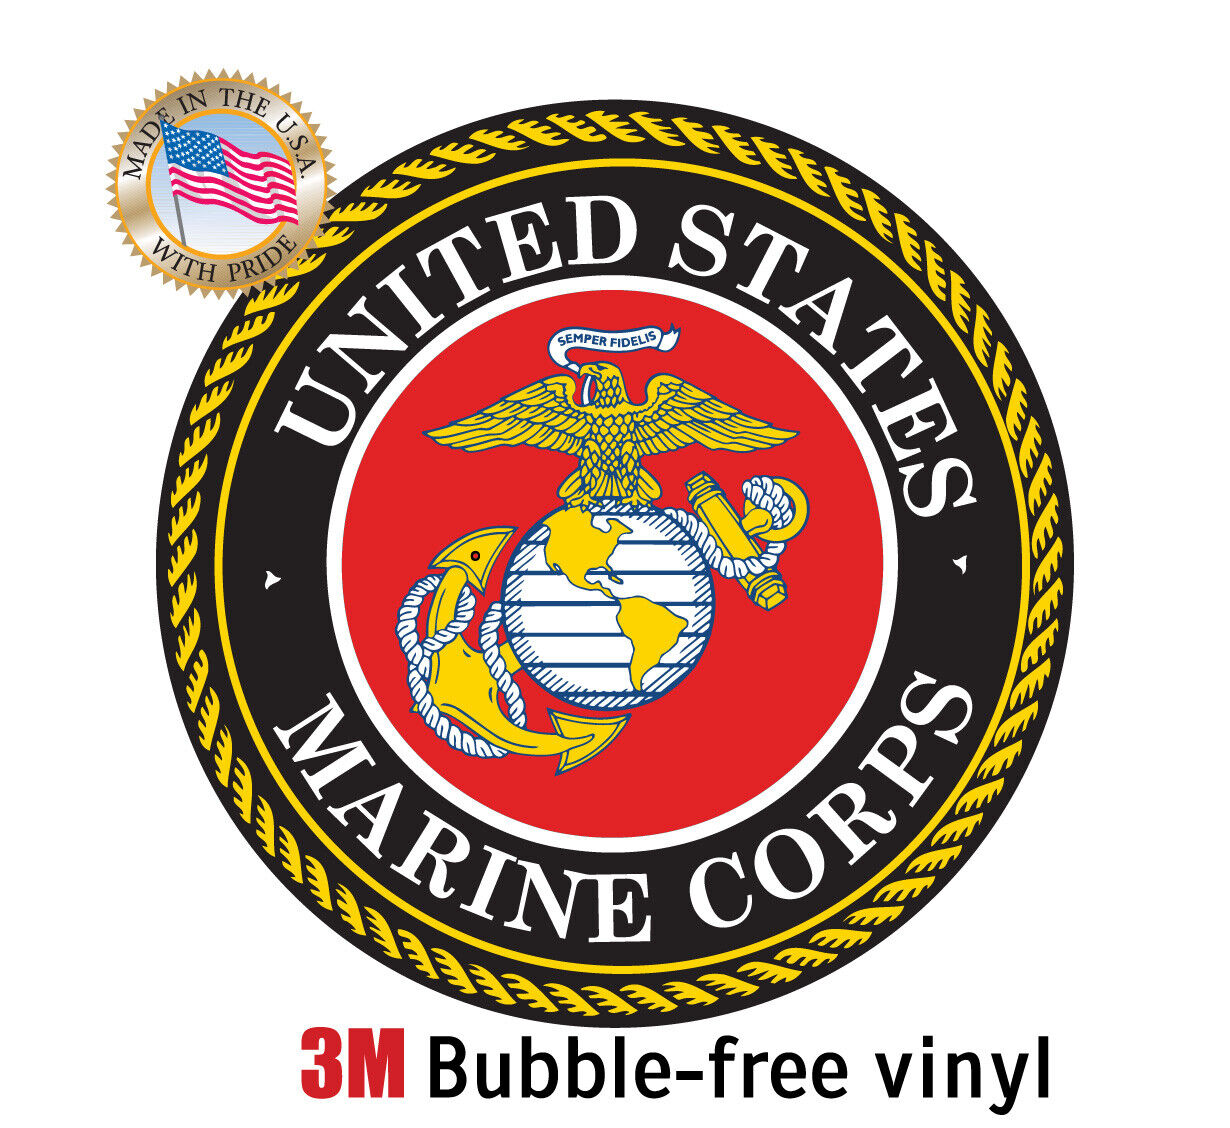 U.S. USMC Marine Corps Seal Car Truck Laptop Decal The Best In Quality Of eBay